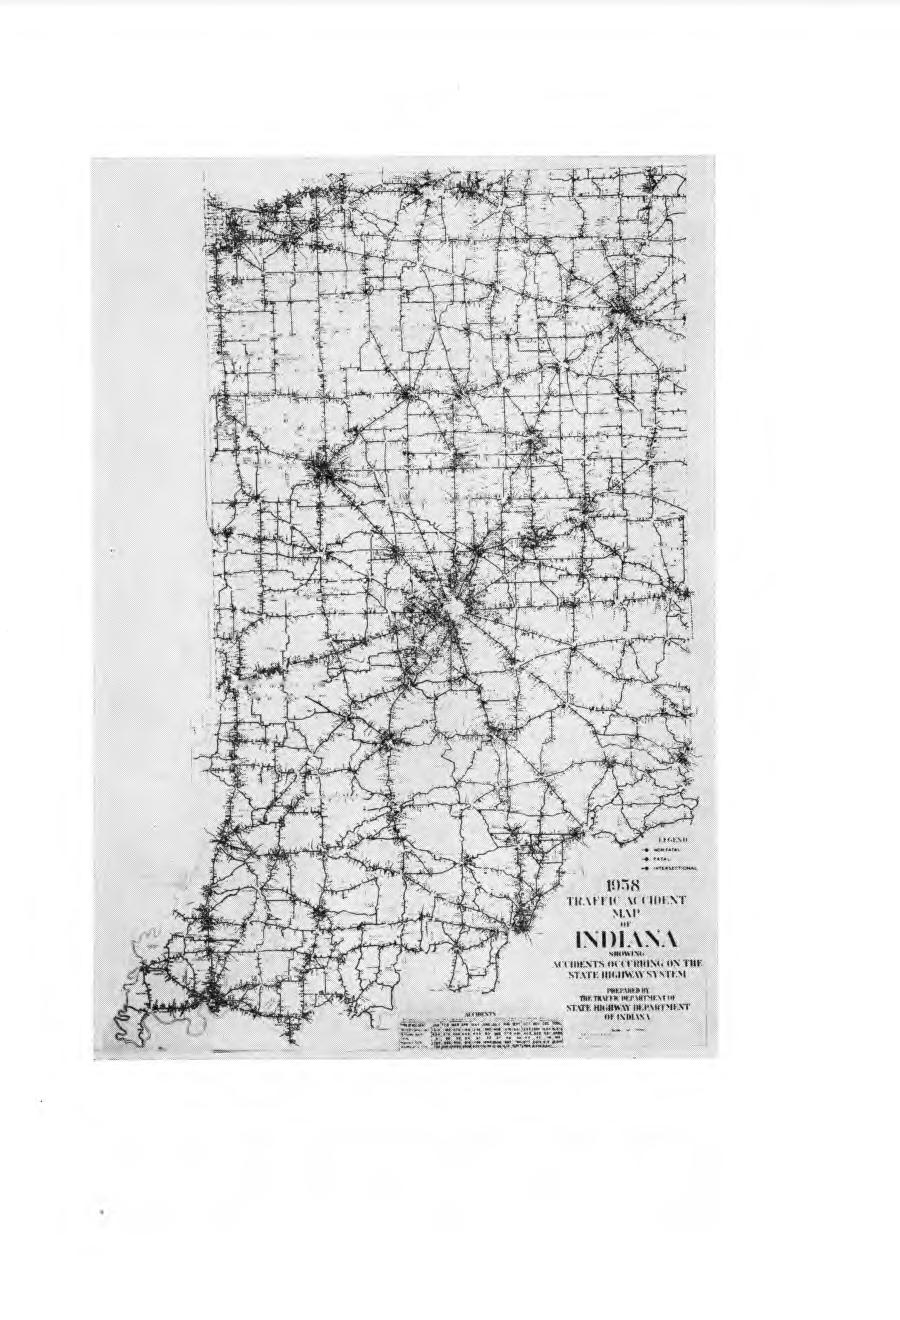 237 Fig. 1. Accident spot map of Indiana for 1958.